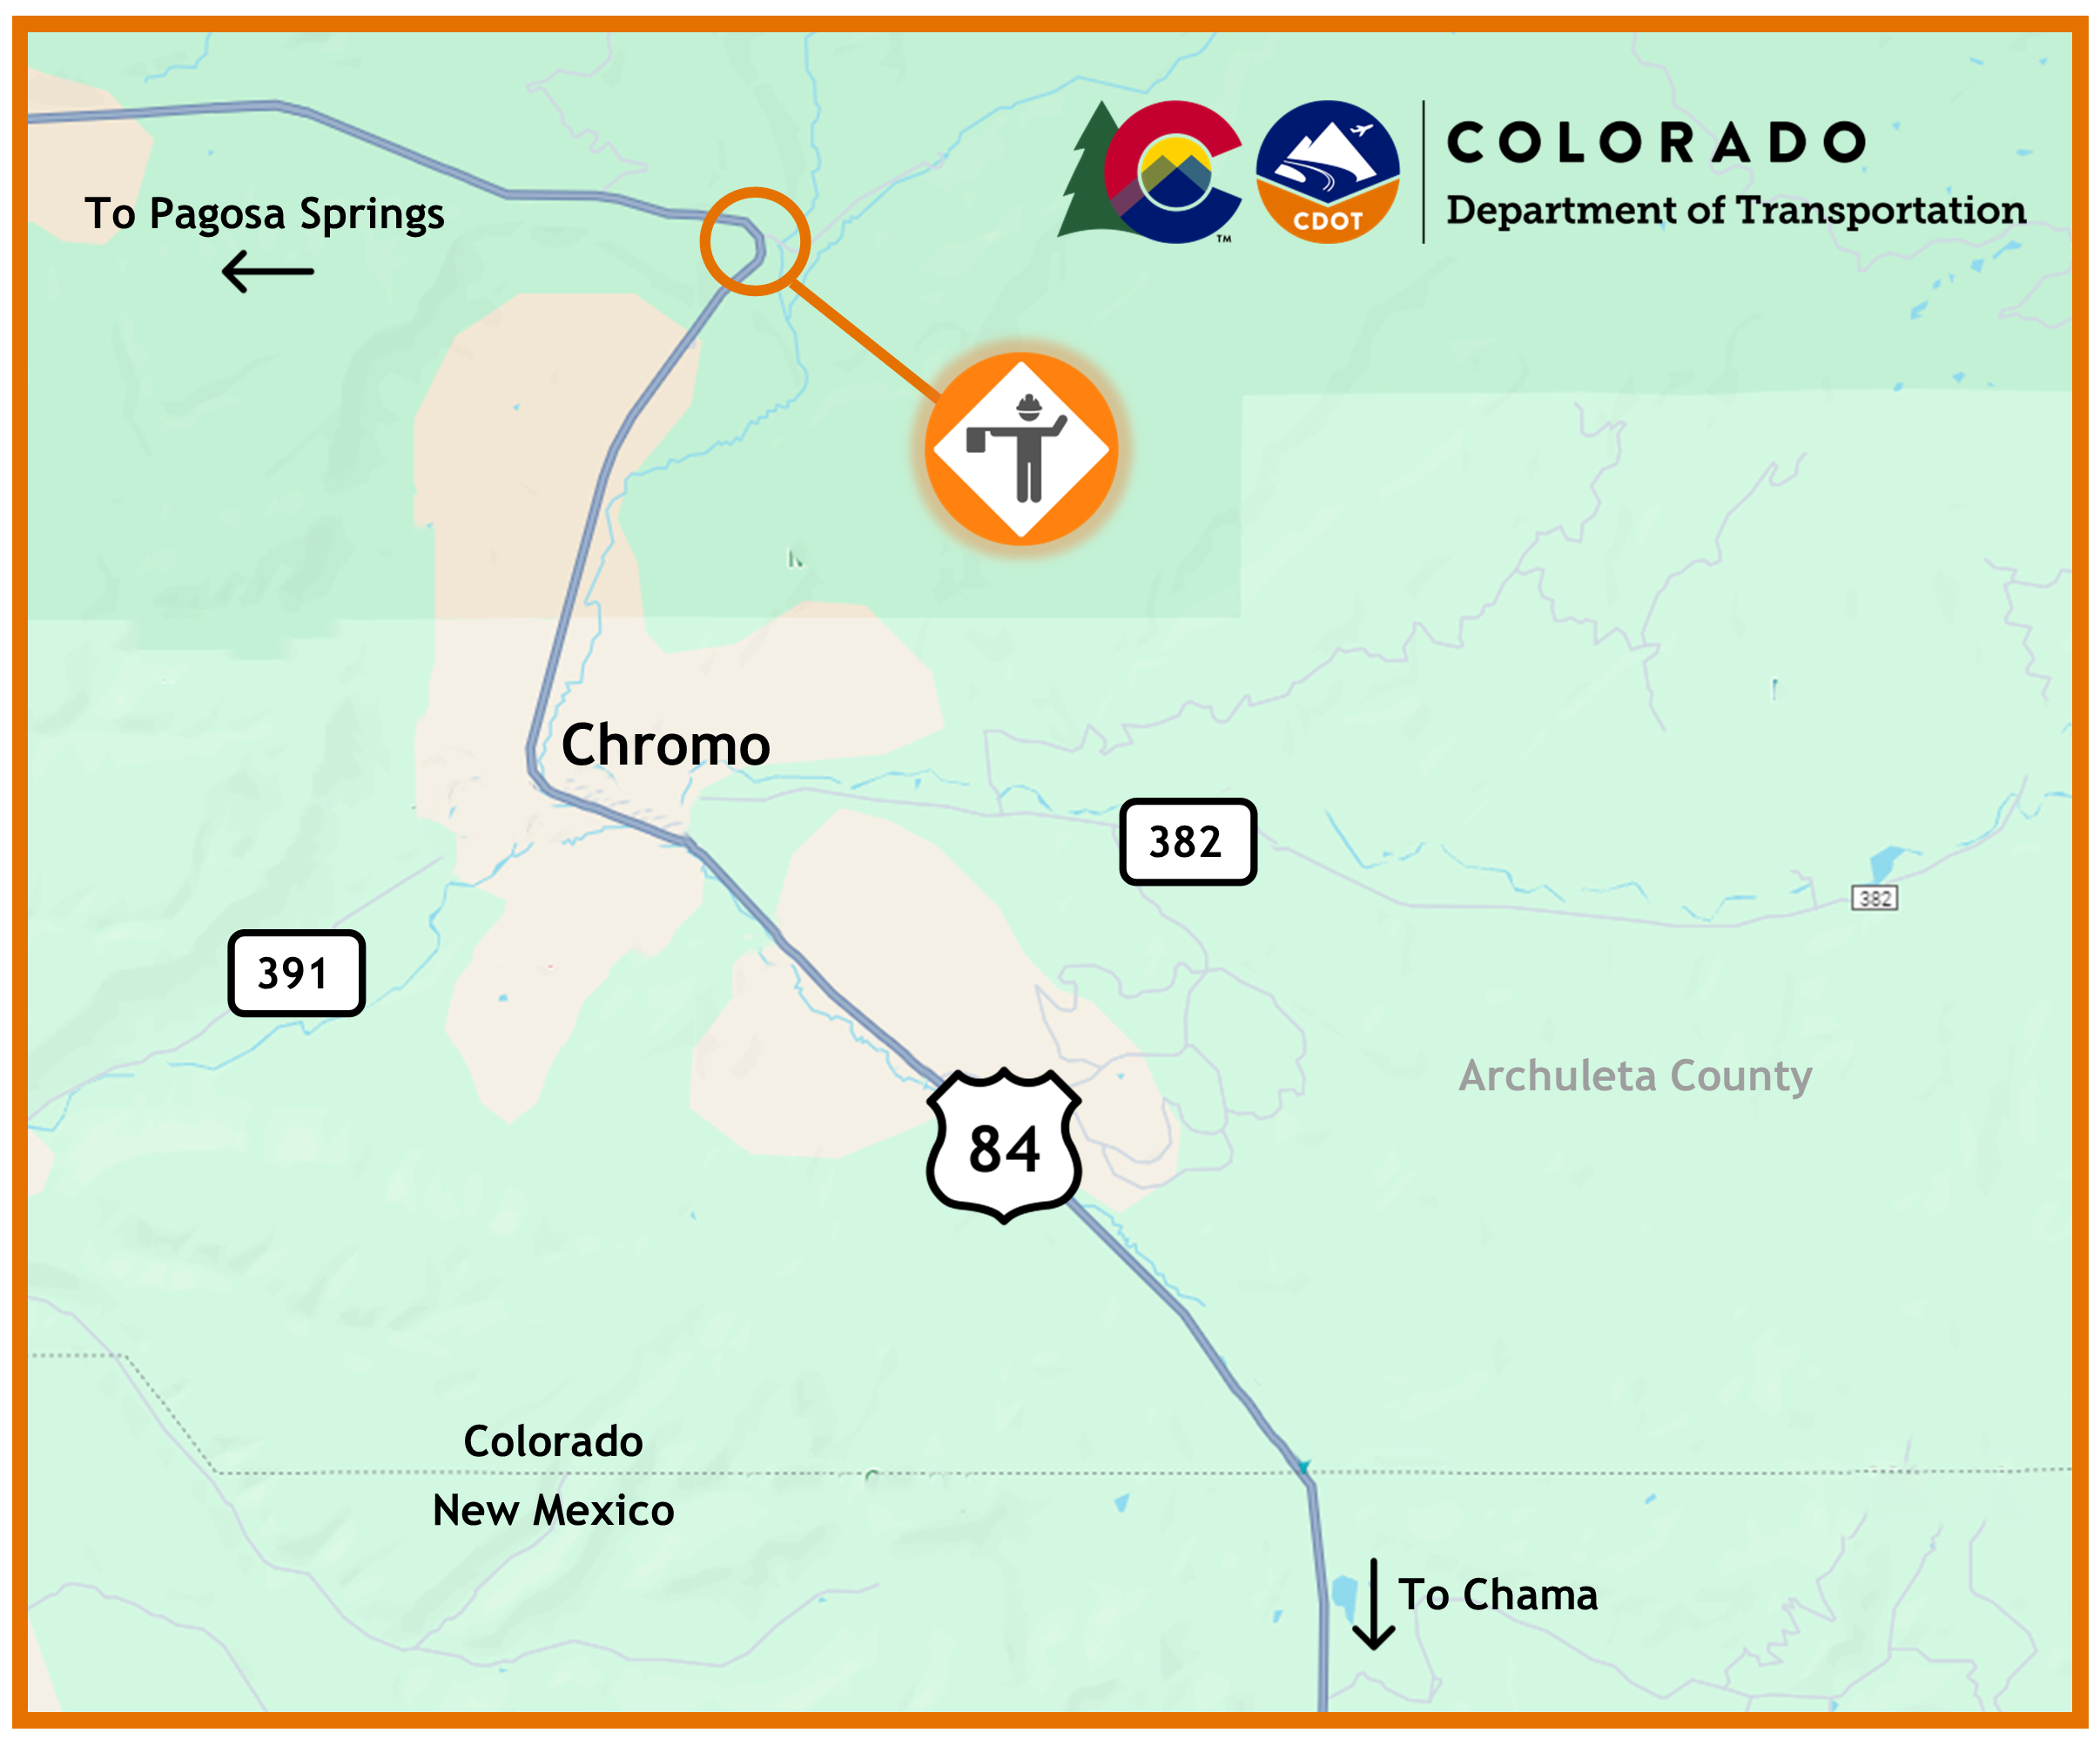 Map_of_slope_repairs_project_on_US84_between_Pagosa_Springs_and_Chama_New_Mexico.png detail image